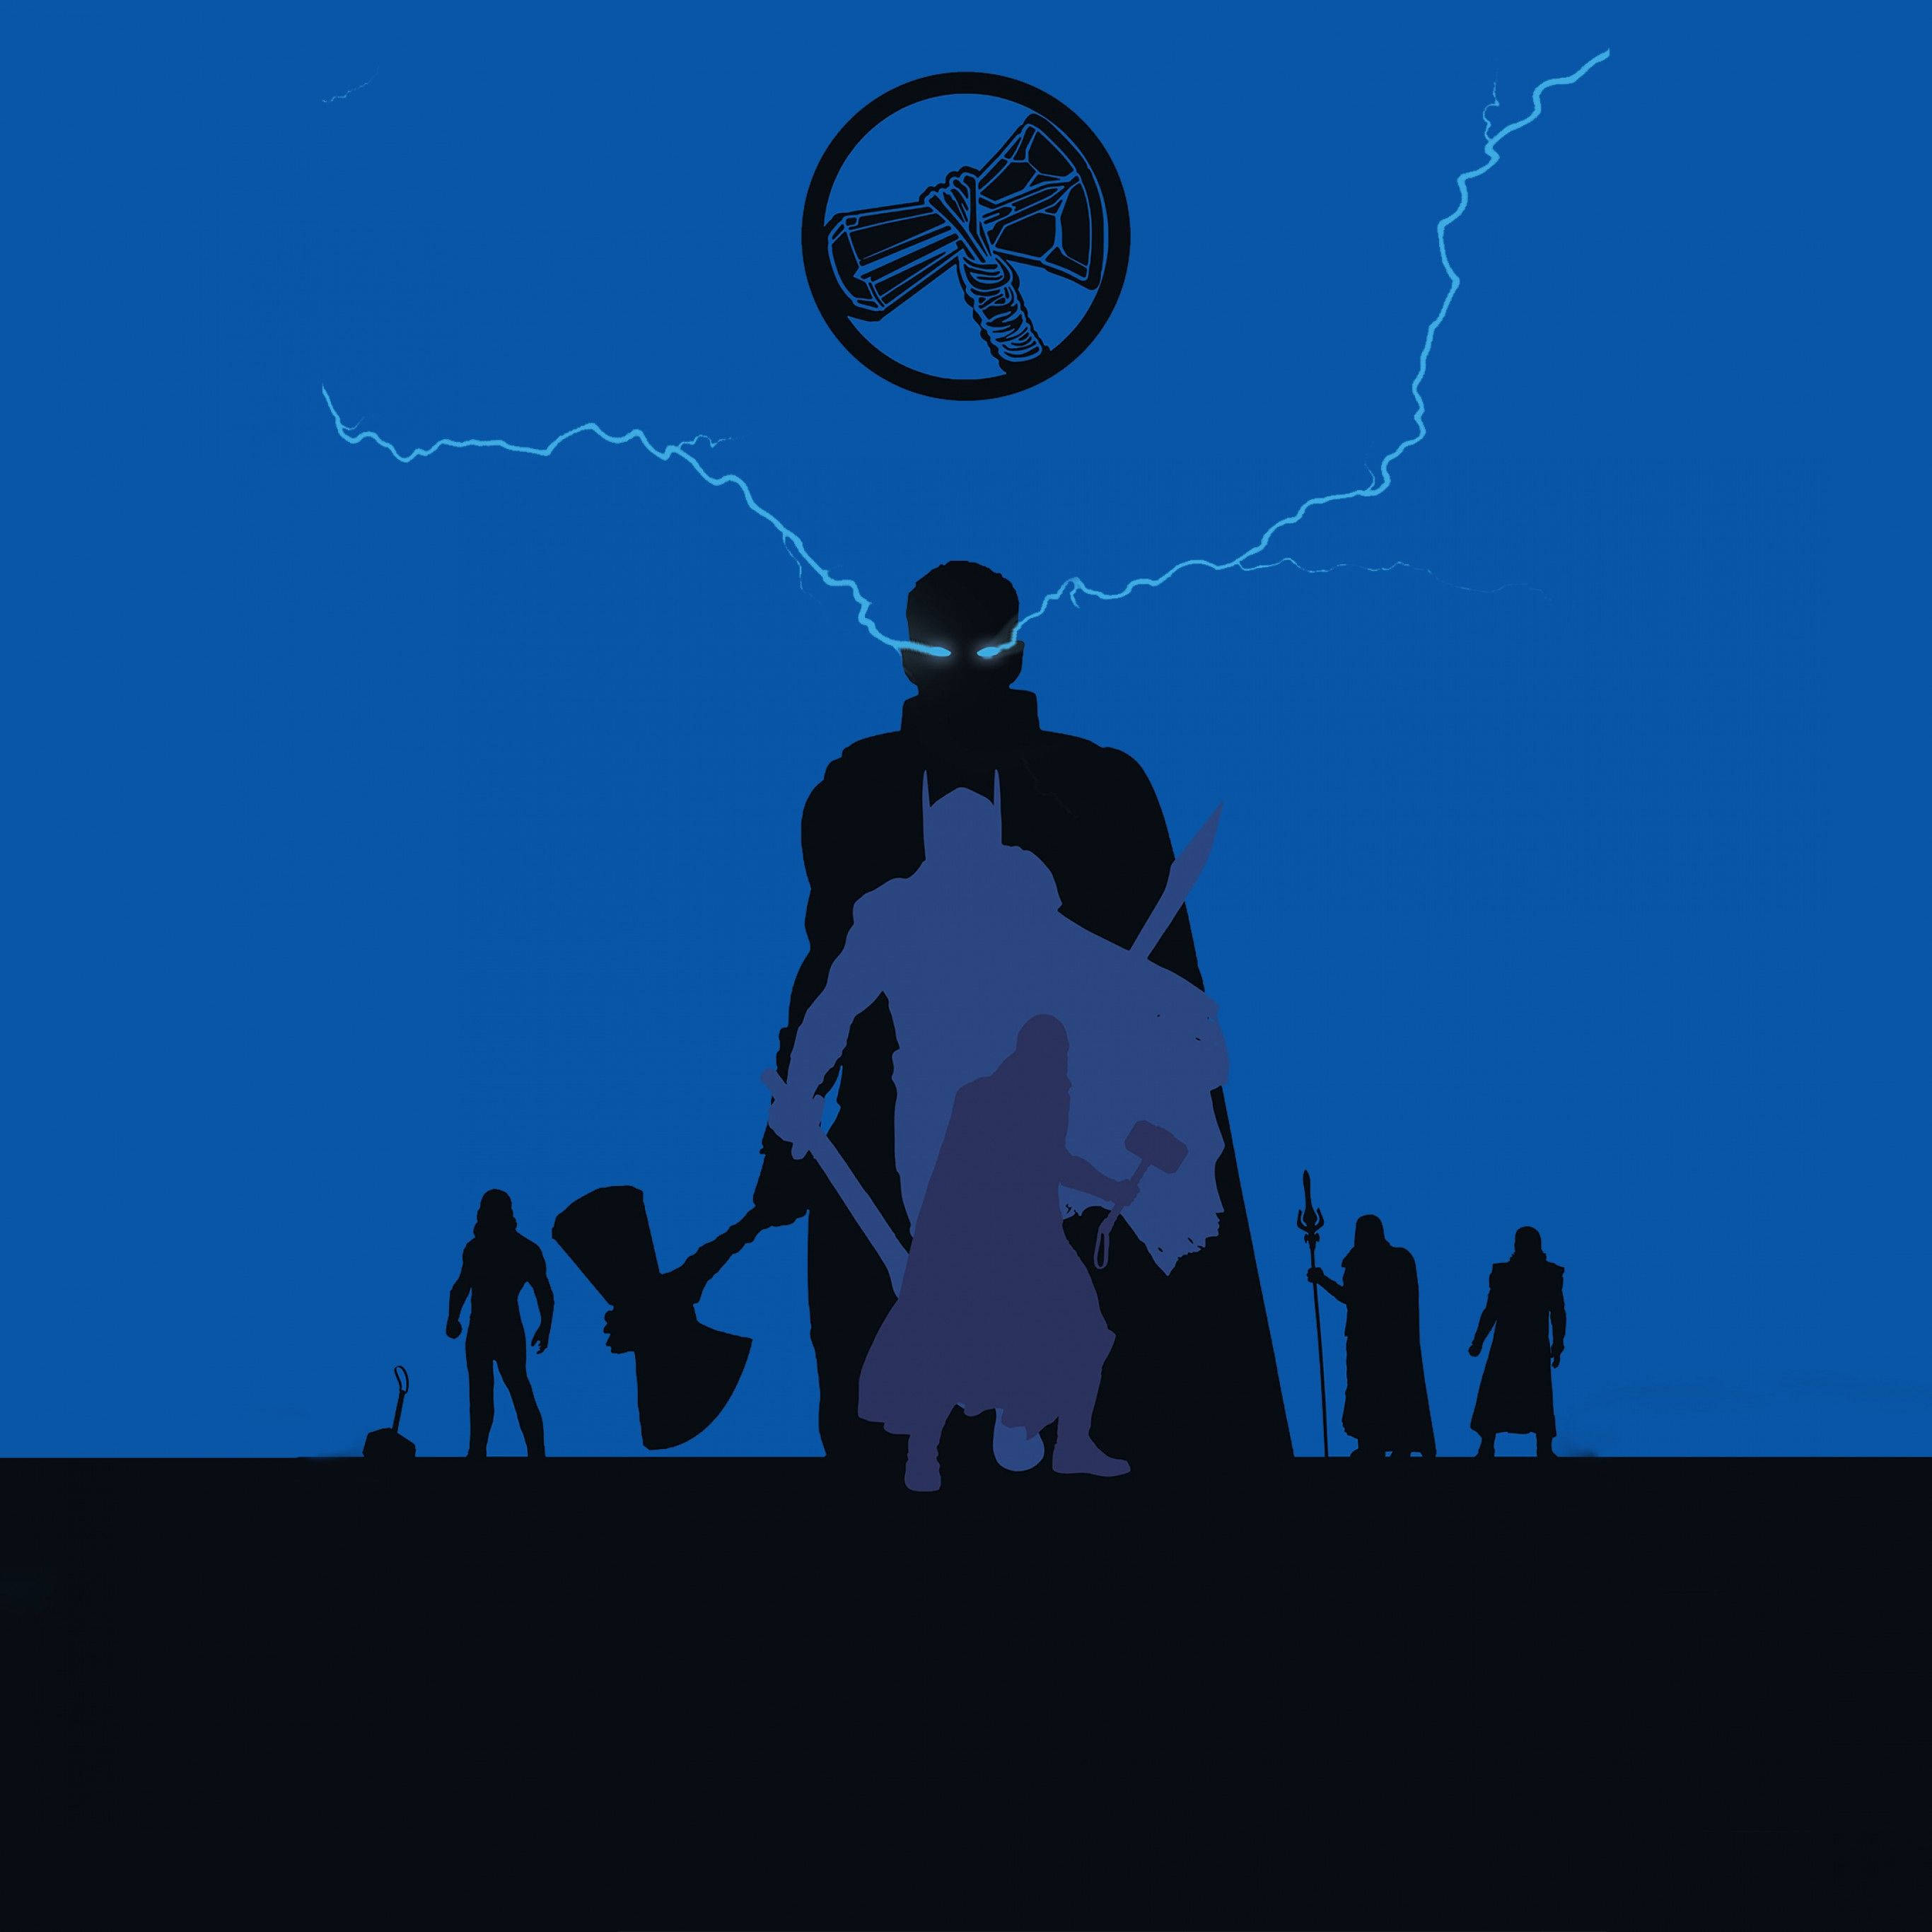 Thor Stormbreaker And Weapons Silhouette Background